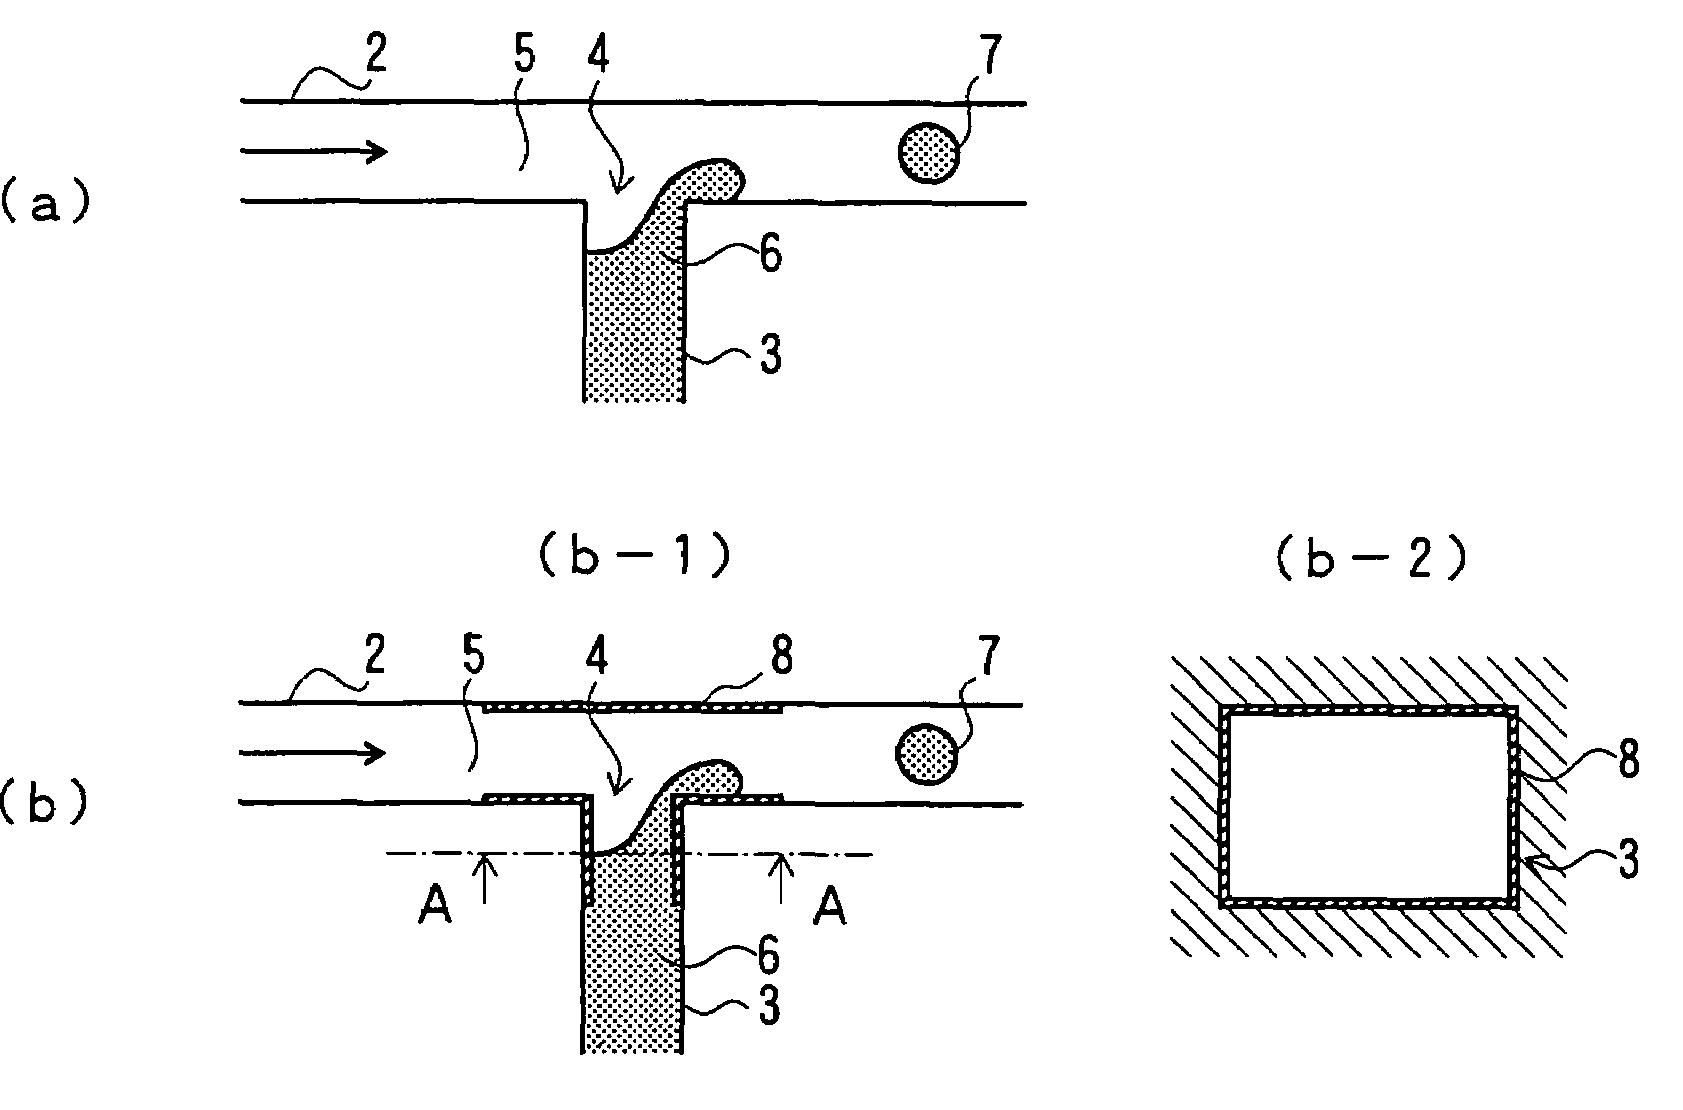 Process for producing emulsion and microcapsules and apparatus therefor